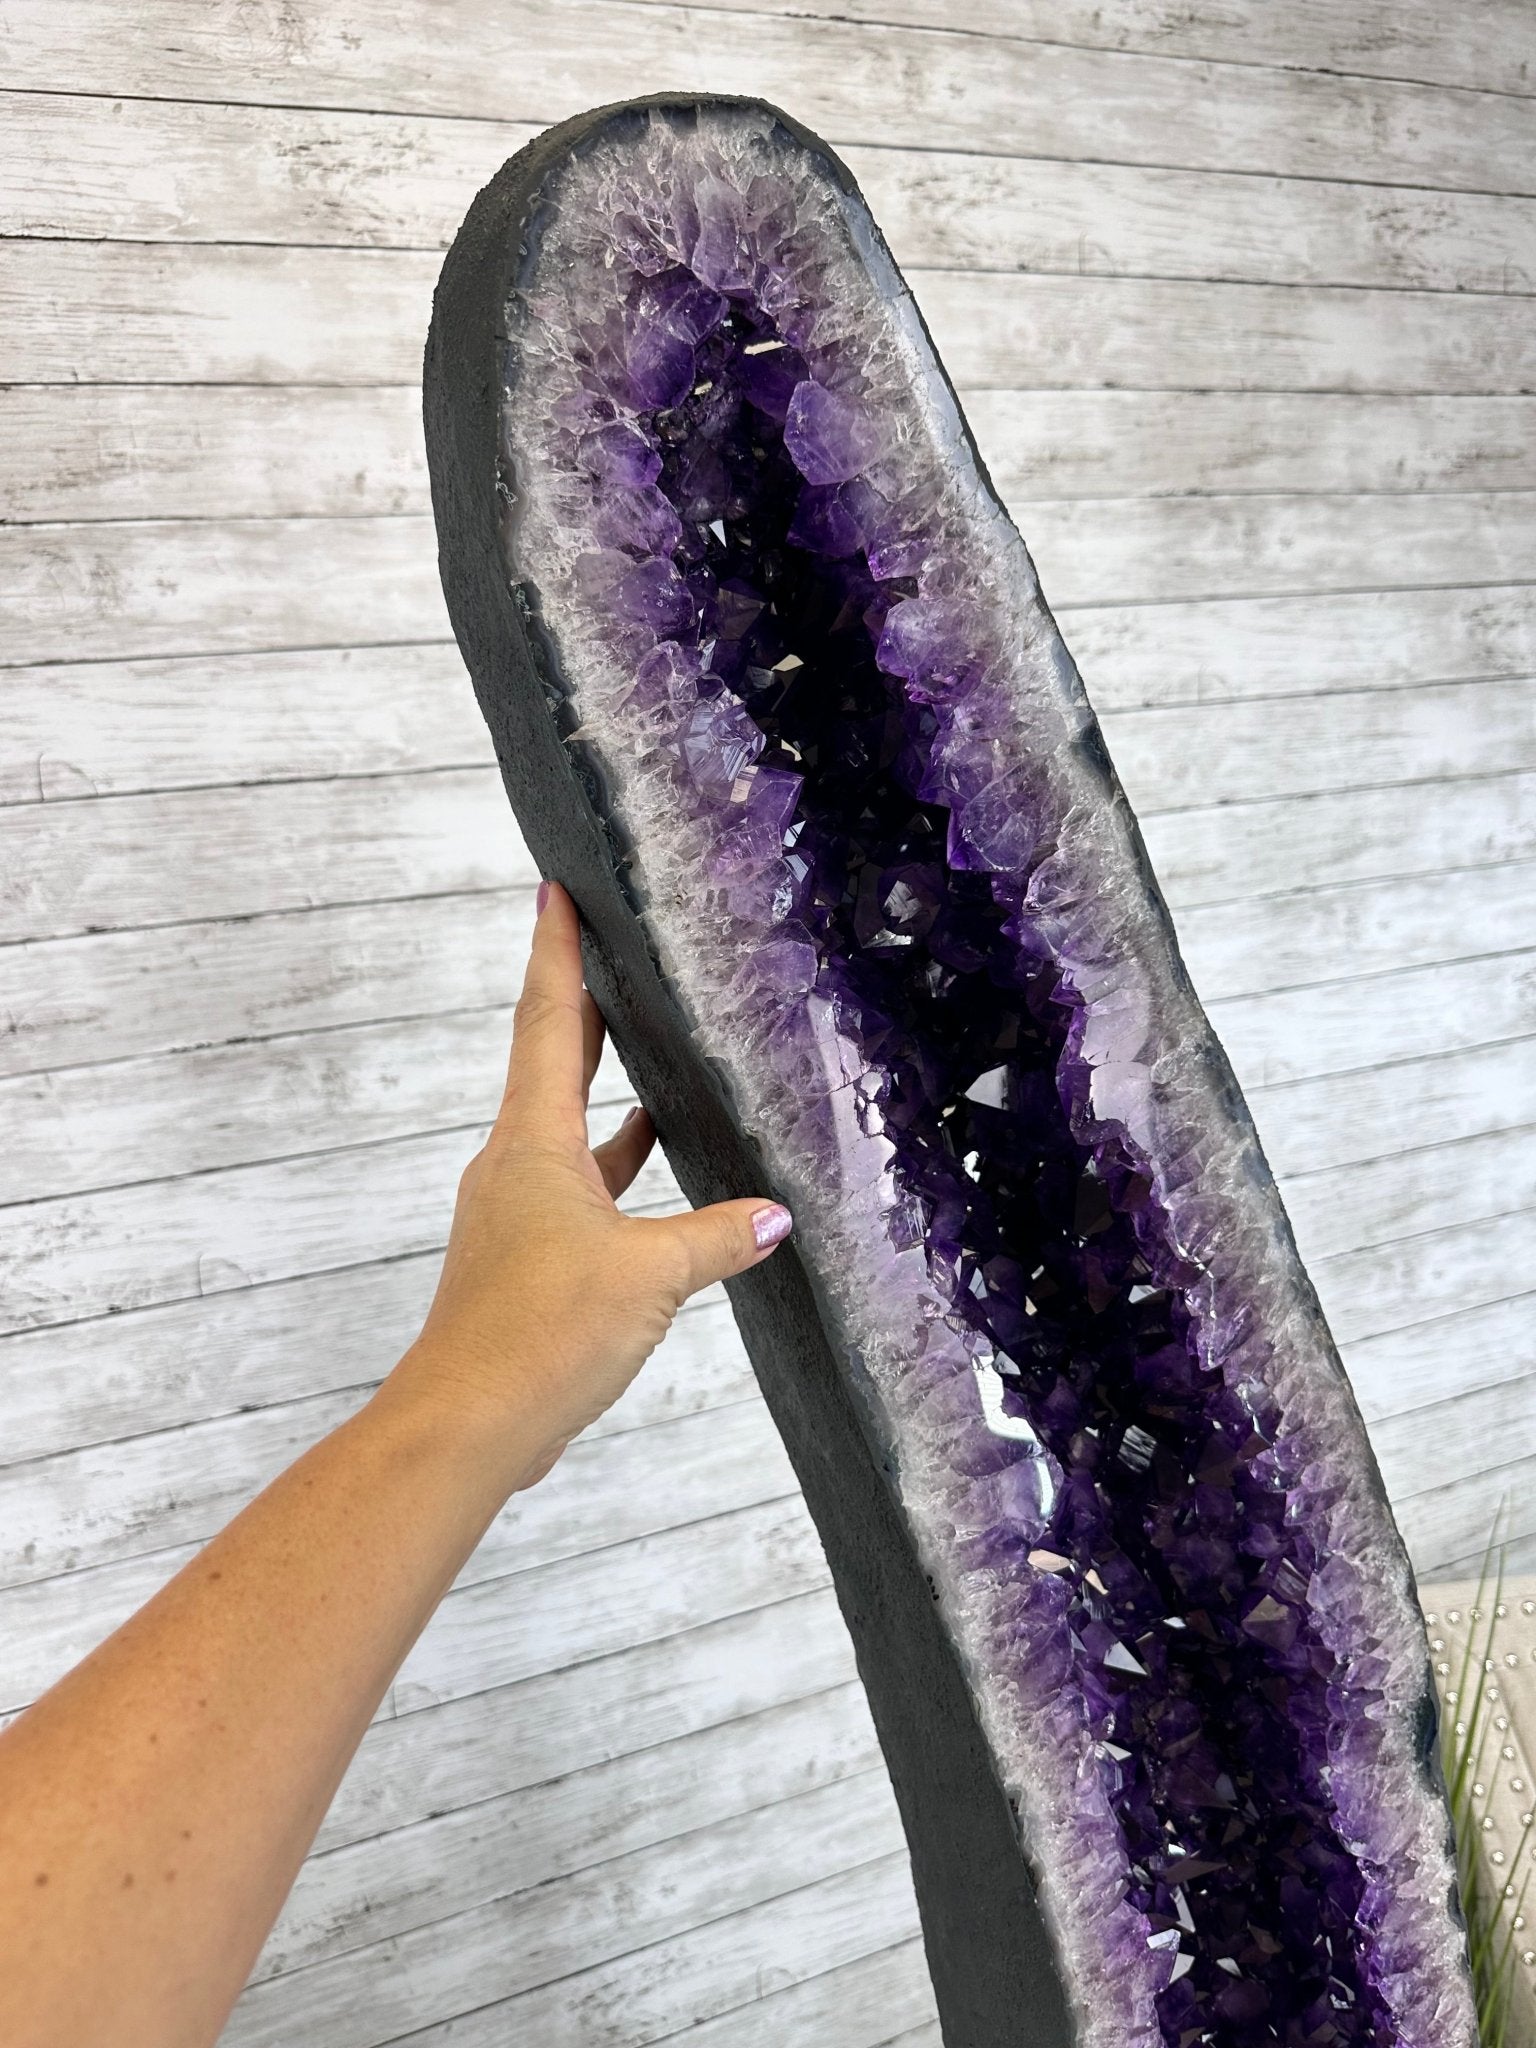 Super Quality Brazilian Amethyst Cathedral, 385 lbs & 72" Tall #5601-1340 - Brazil GemsBrazil GemsSuper Quality Brazilian Amethyst Cathedral, 385 lbs & 72" Tall #5601-1340Cathedrals5601-1340